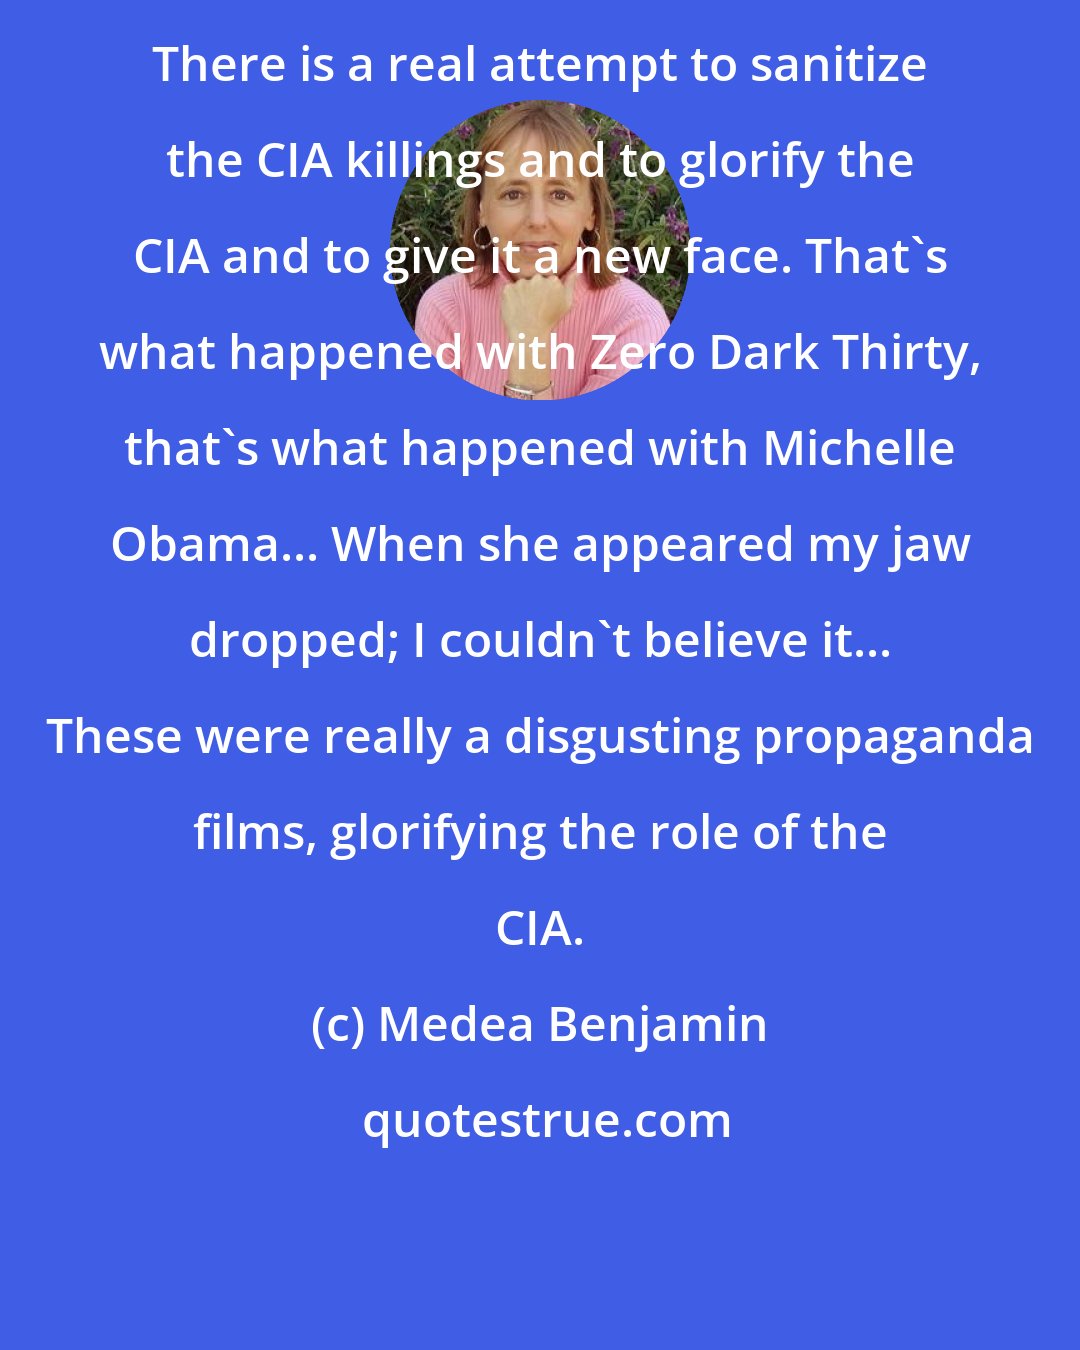 Medea Benjamin: There is a real attempt to sanitize the CIA killings and to glorify the CIA and to give it a new face. That's what happened with Zero Dark Thirty, that's what happened with Michelle Obama... When she appeared my jaw dropped; I couldn't believe it... These were really a disgusting propaganda films, glorifying the role of the CIA.